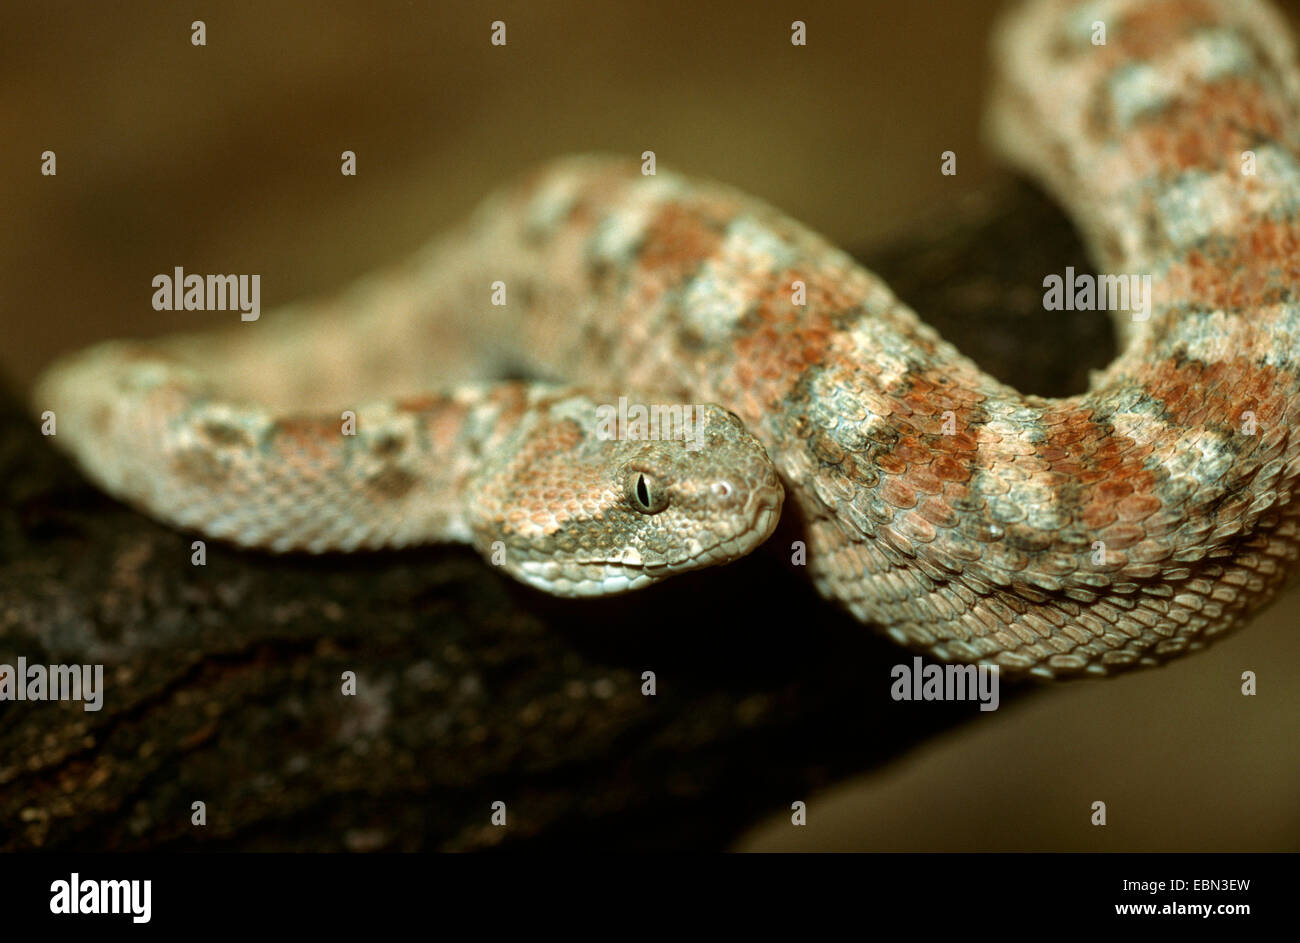 Arabic saw-scaled viper, Palestine saw-scaled viper (Echis coloratus), closeup on a branch, one of the most dangerous venomous snakes Stock Photo